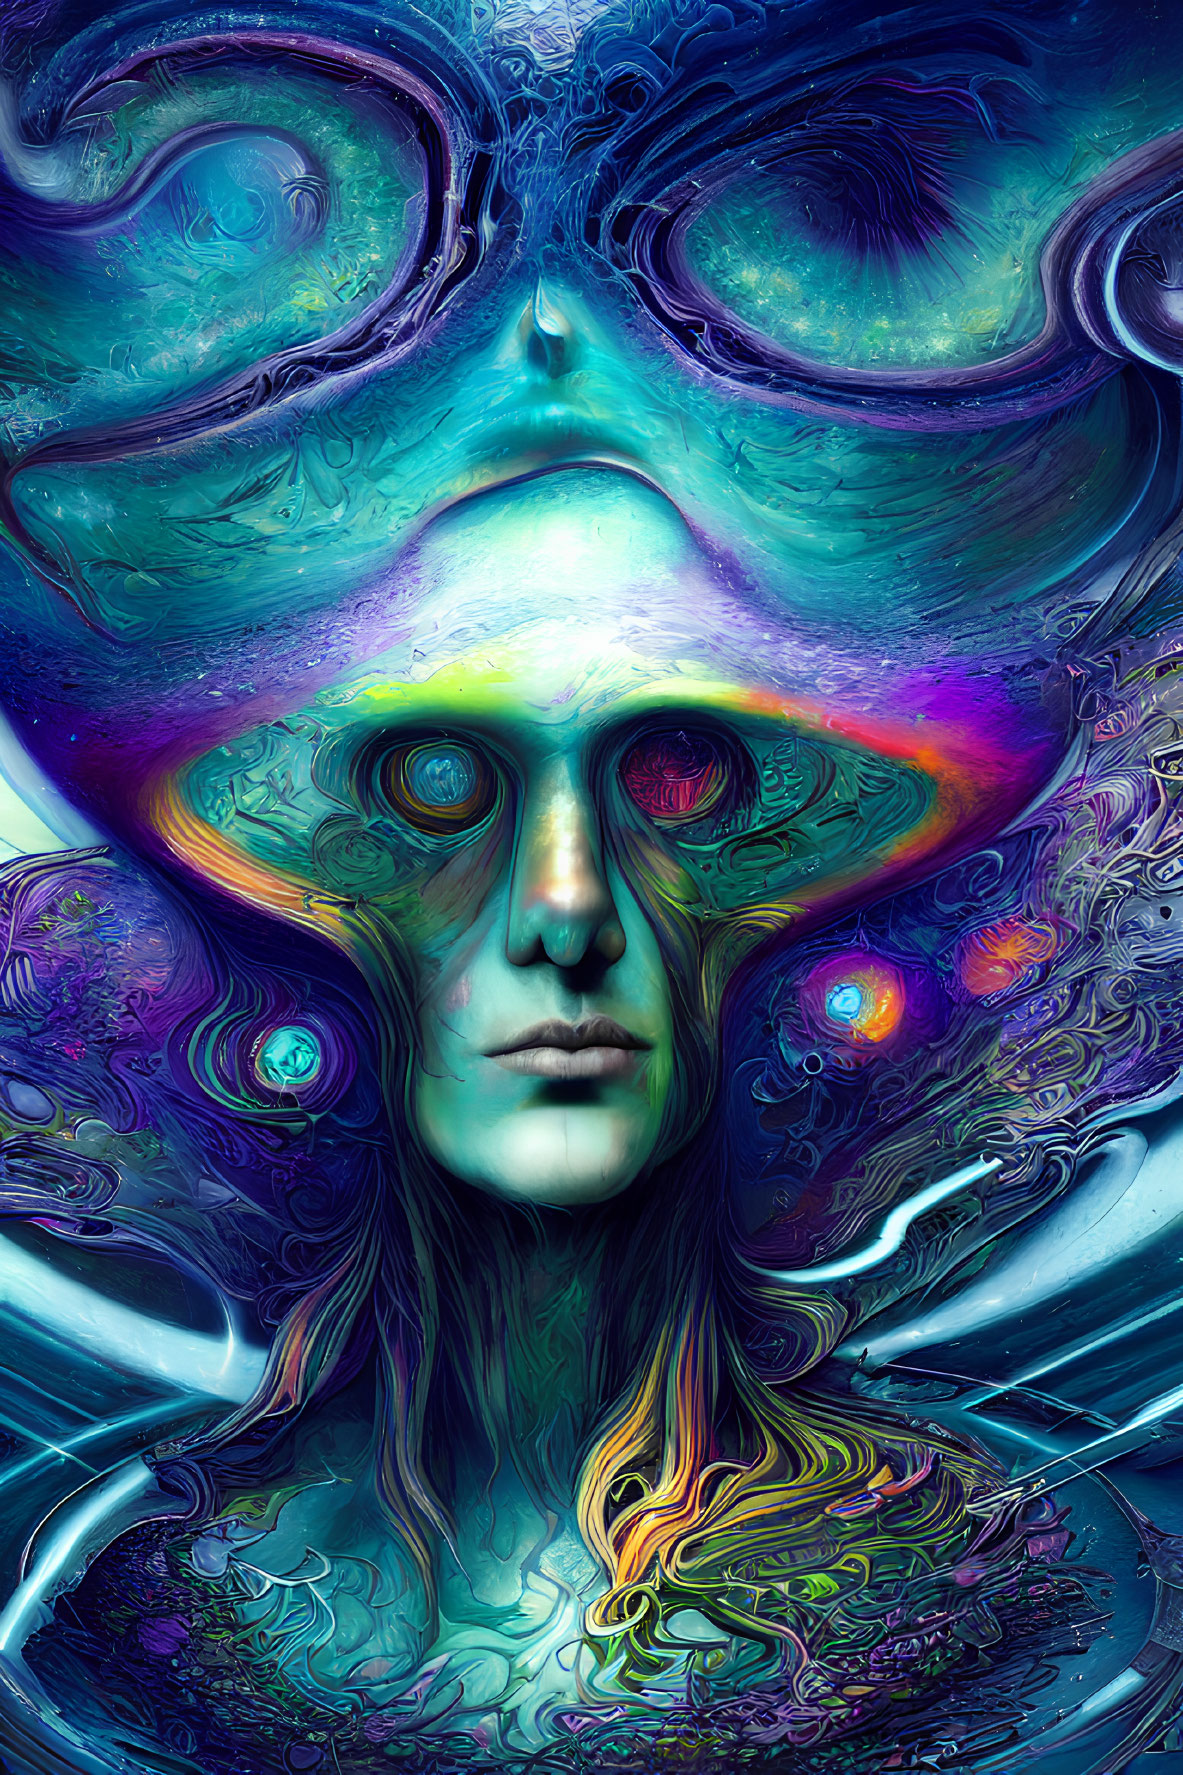 Vivid Psychedelic Digital Artwork: Abstract Human Face with Cosmic Patterns